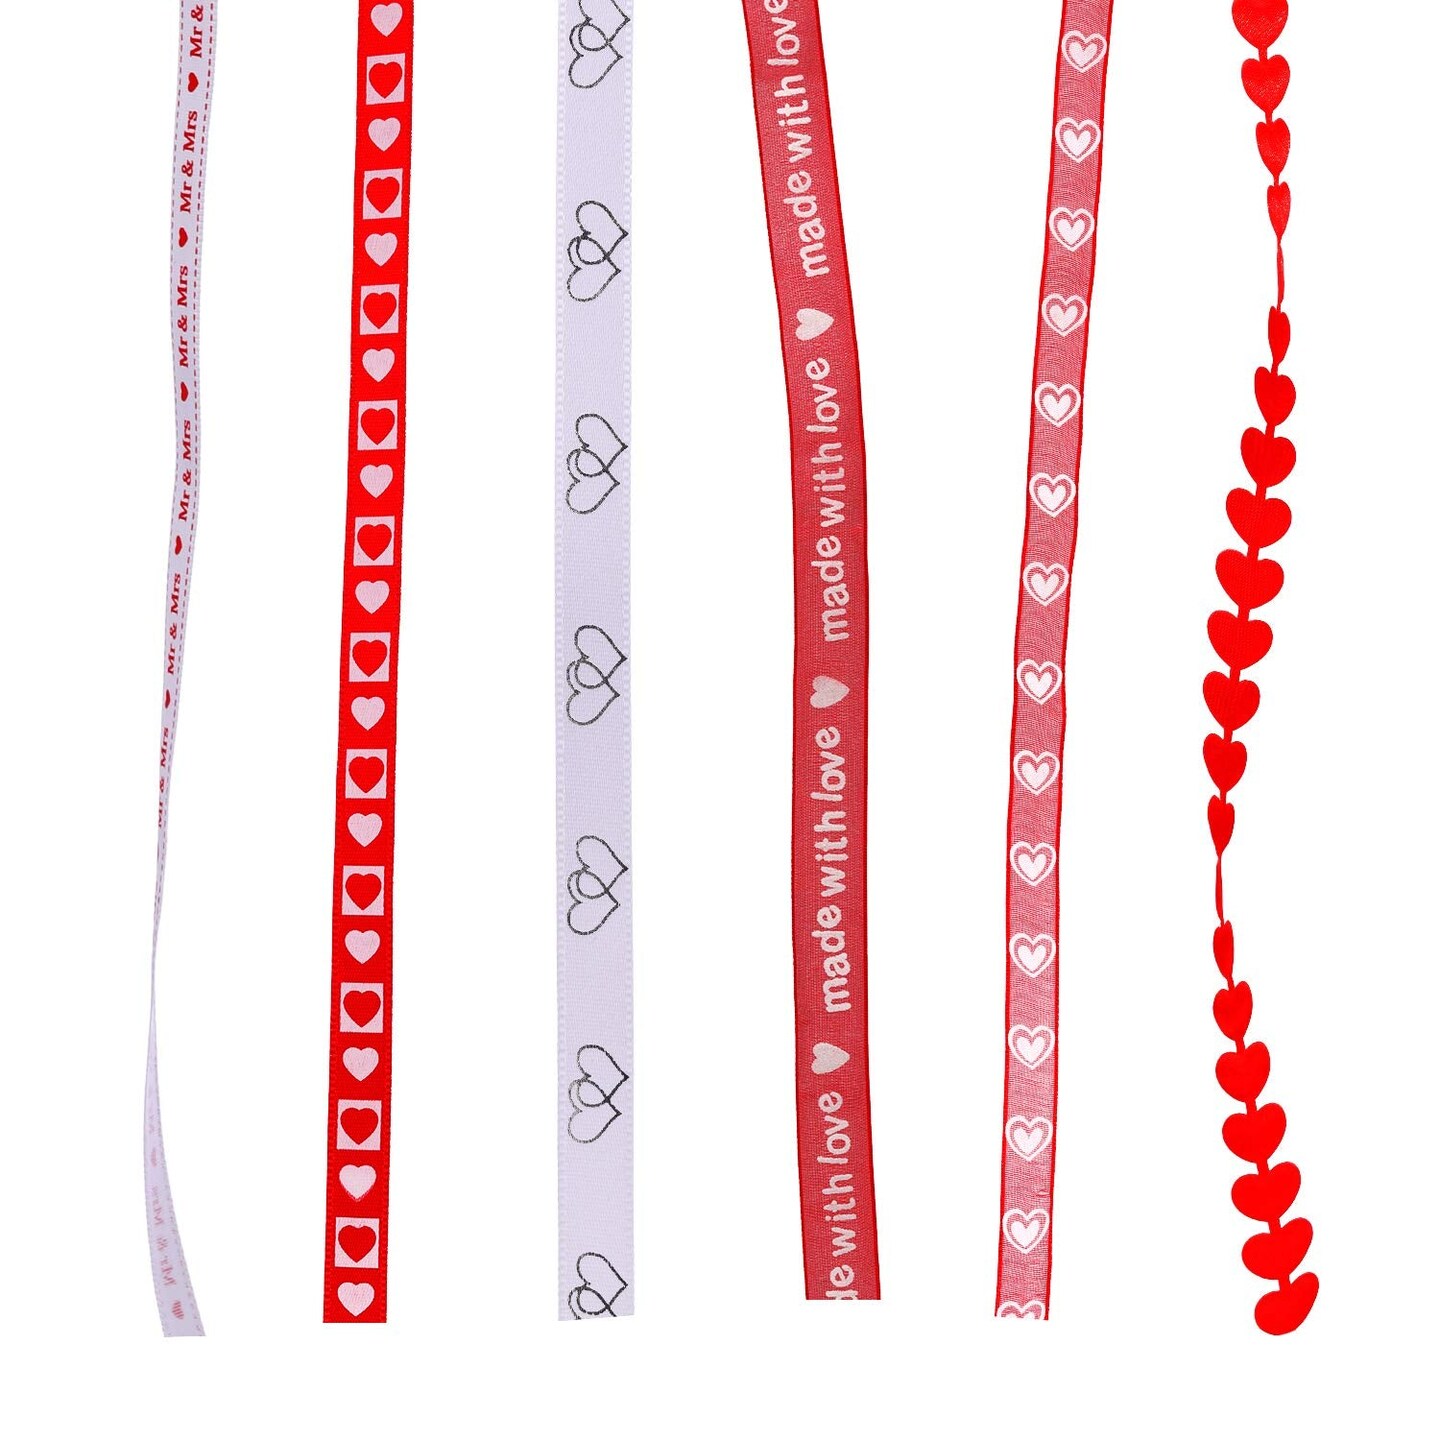 Zhanmai 6 Pieces Valentine&#x27;s Day Ribbons Printed Heart Wired Ribbons Craft Satin Ribbons for Gift Wrapping DIY Supplies